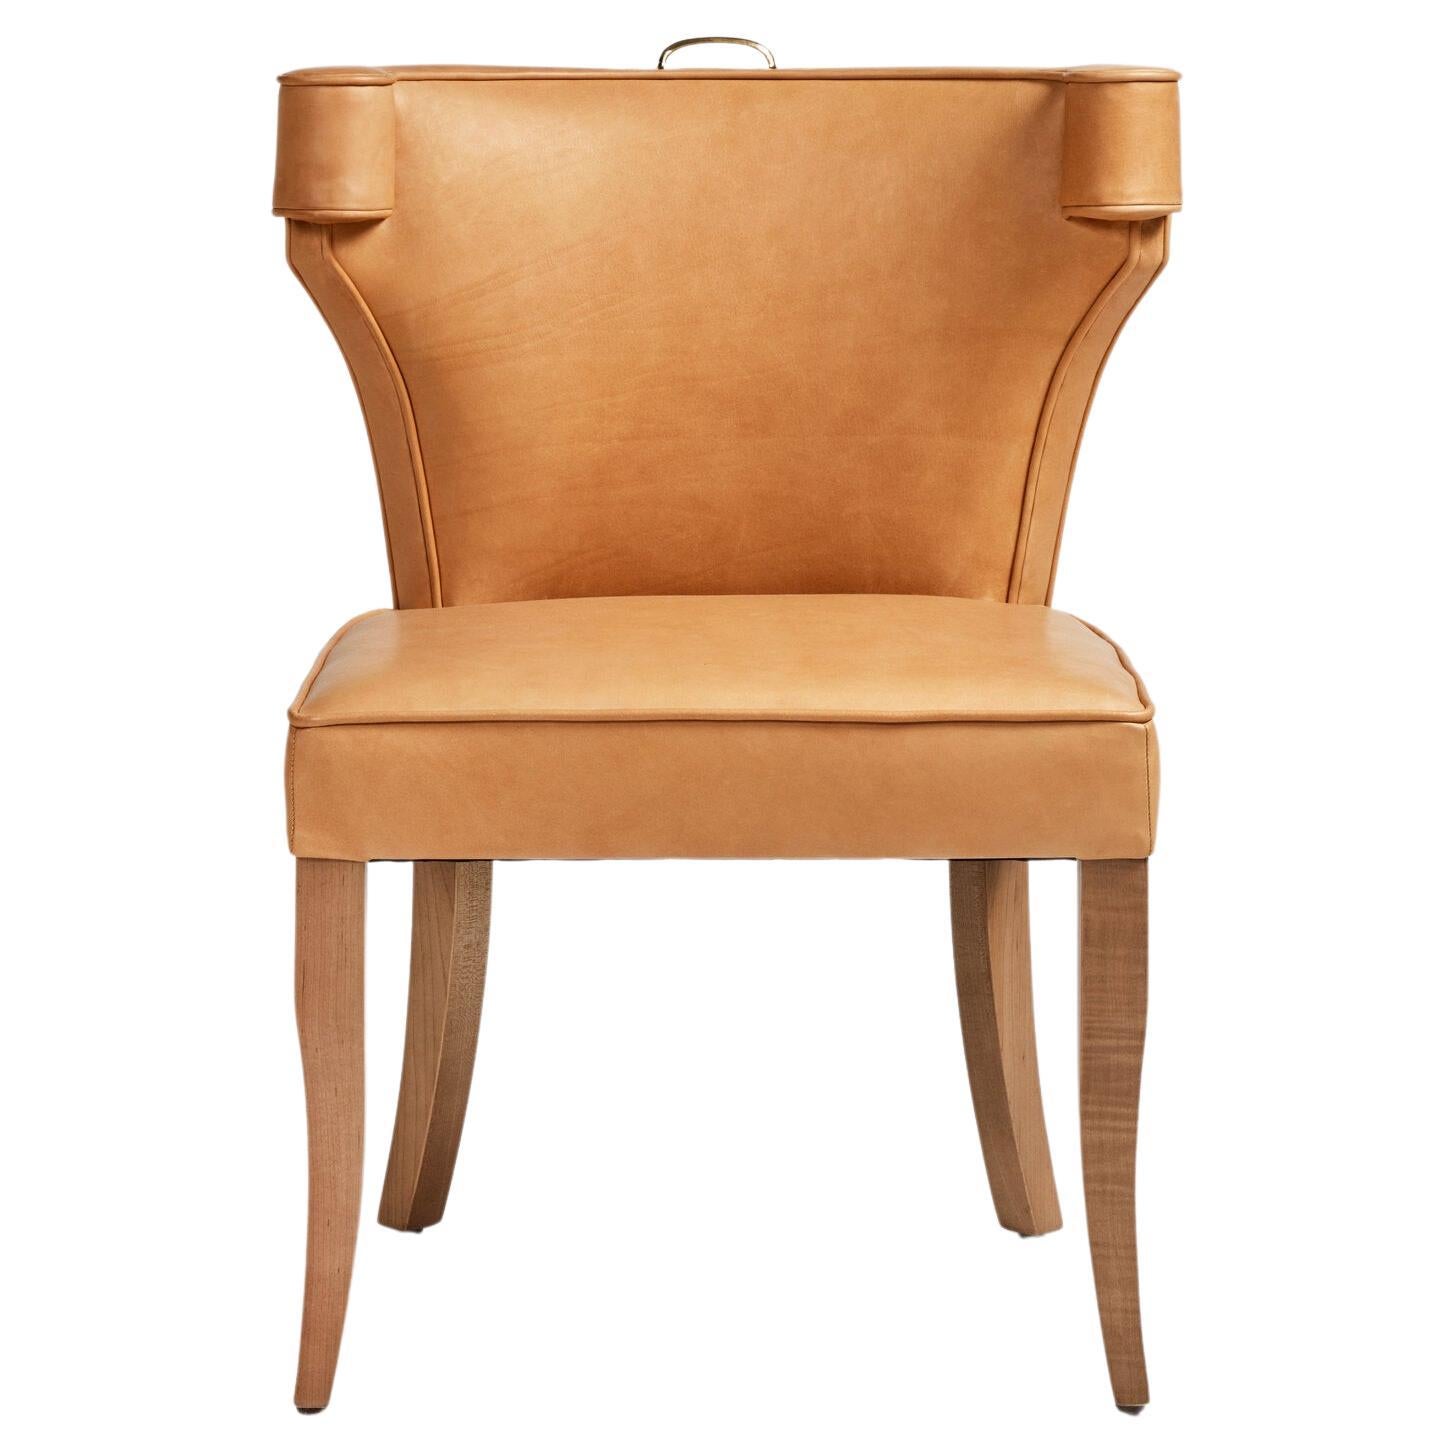 Traditional Upholstered Dining Chair with Brass Handle by Martin and Brockett